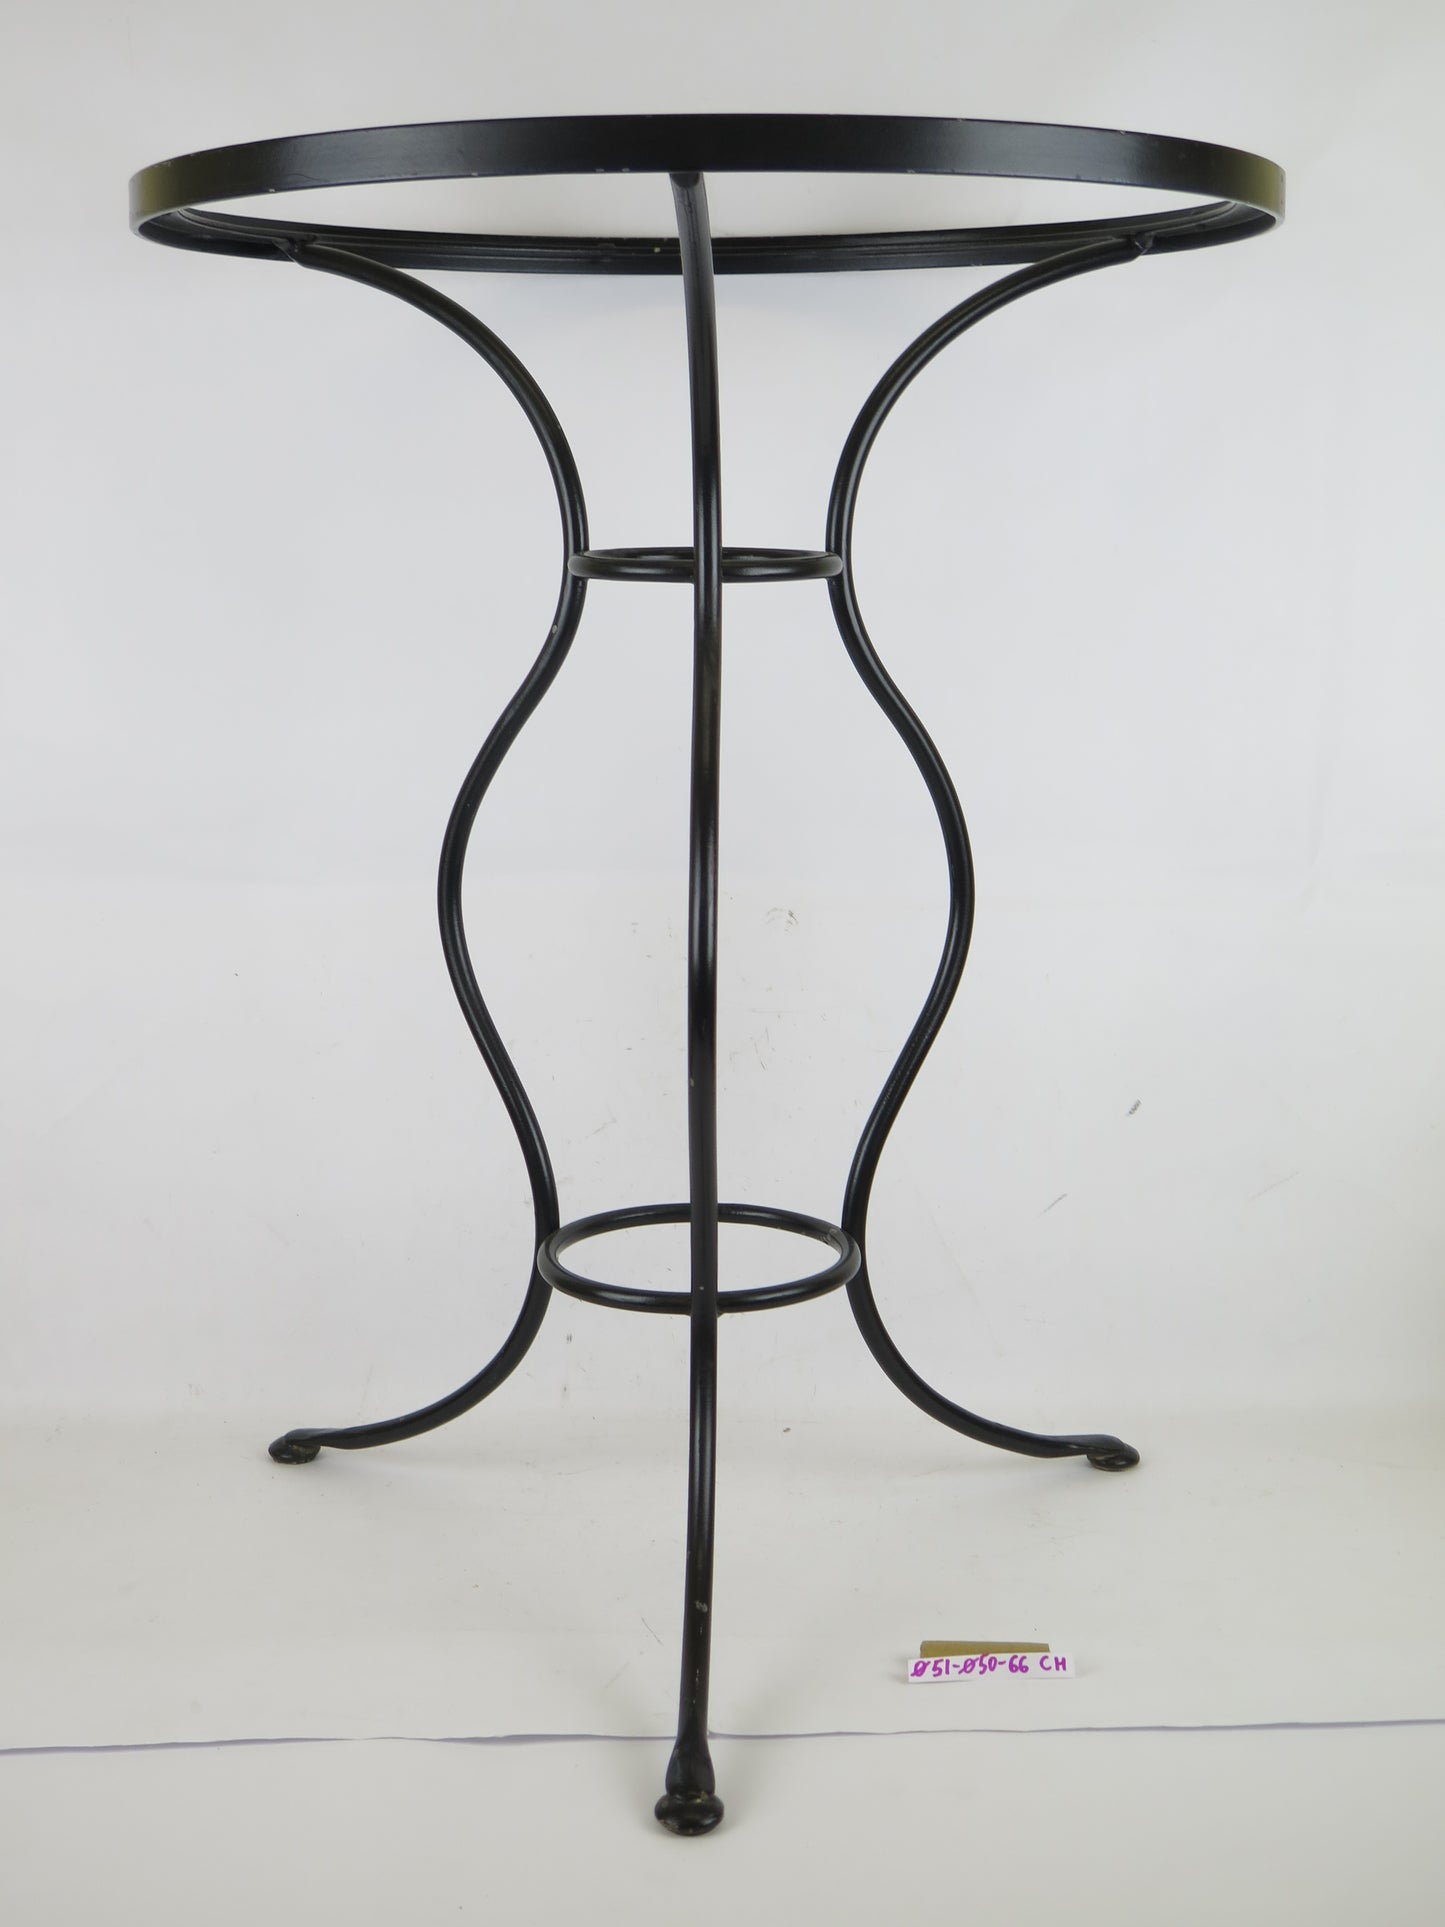 HIGH QUALITY HAND FORGED WROUGHT IRON TABLE VINTAGE ROUND CH